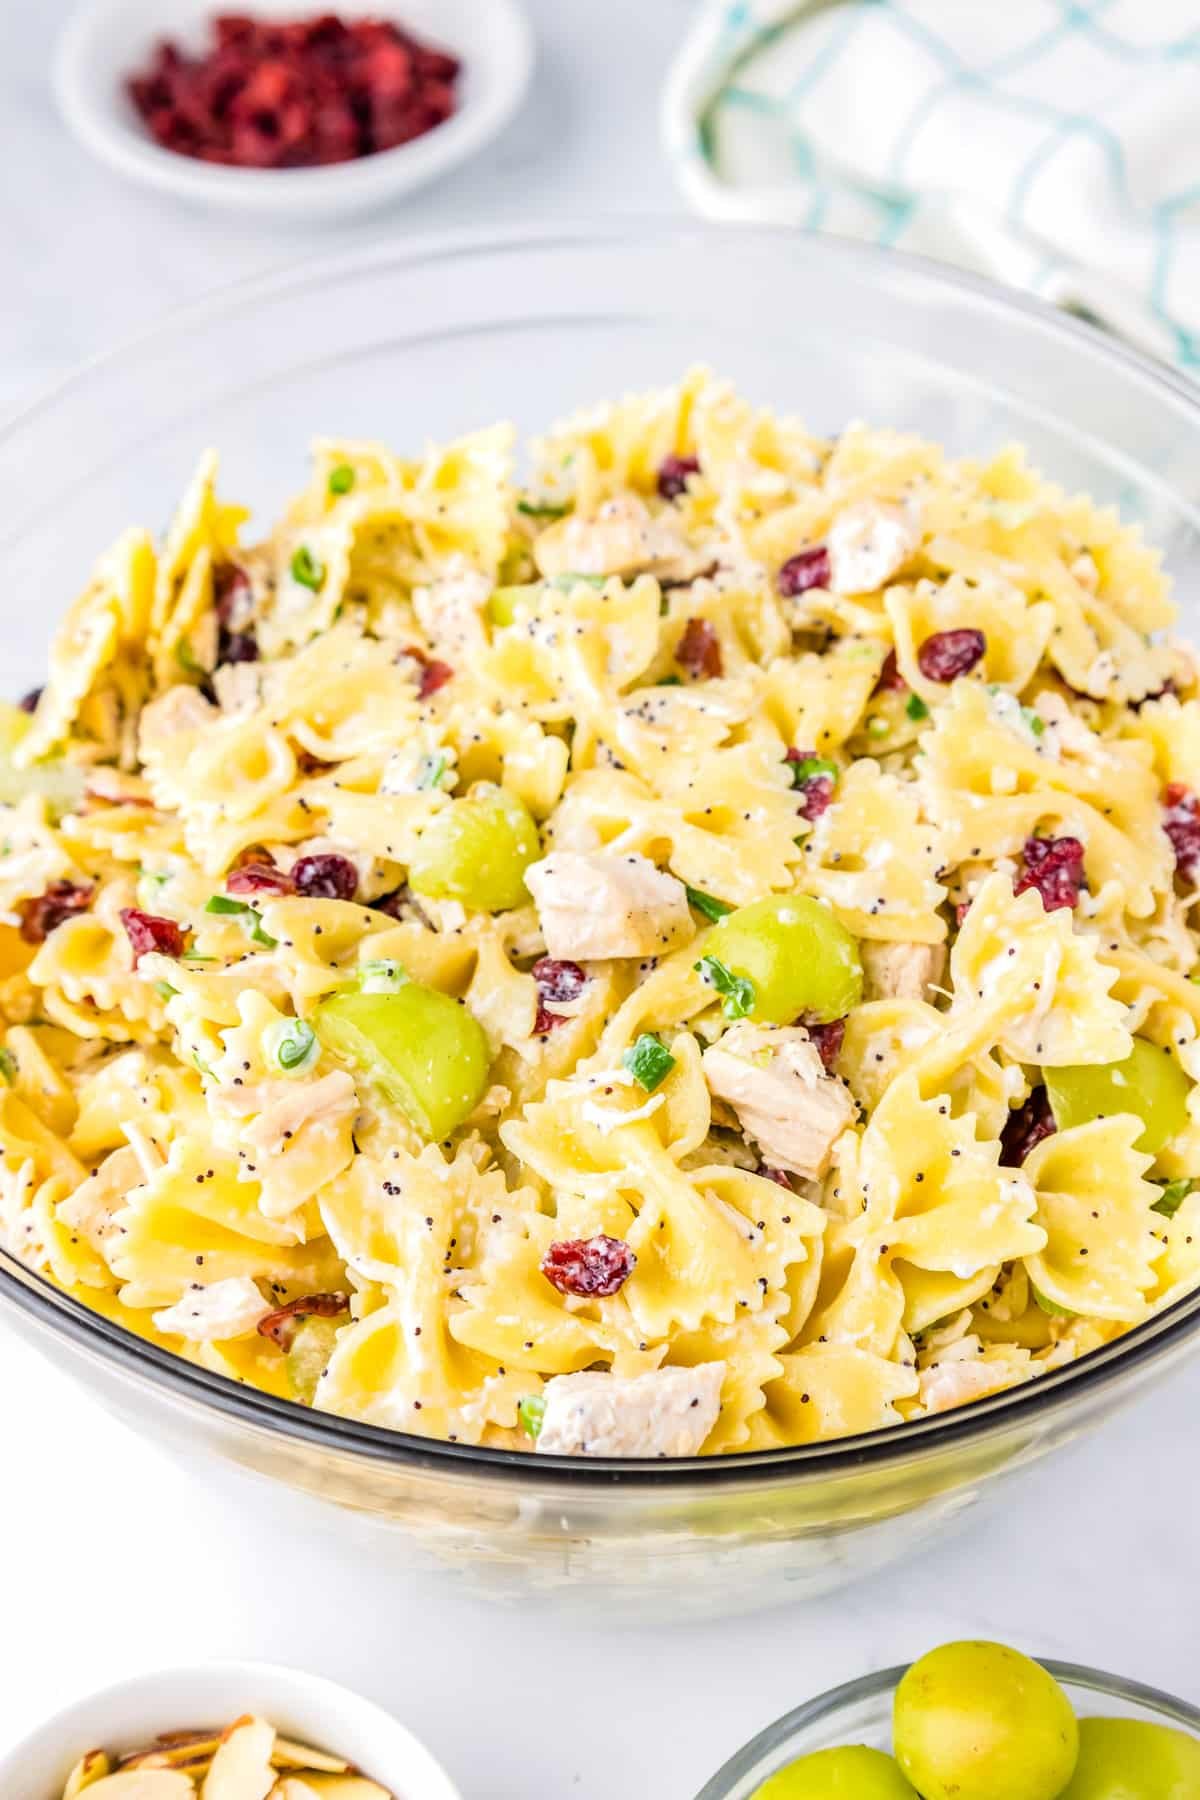 Chicken pasta salad with grapes in a clear serving bowl.